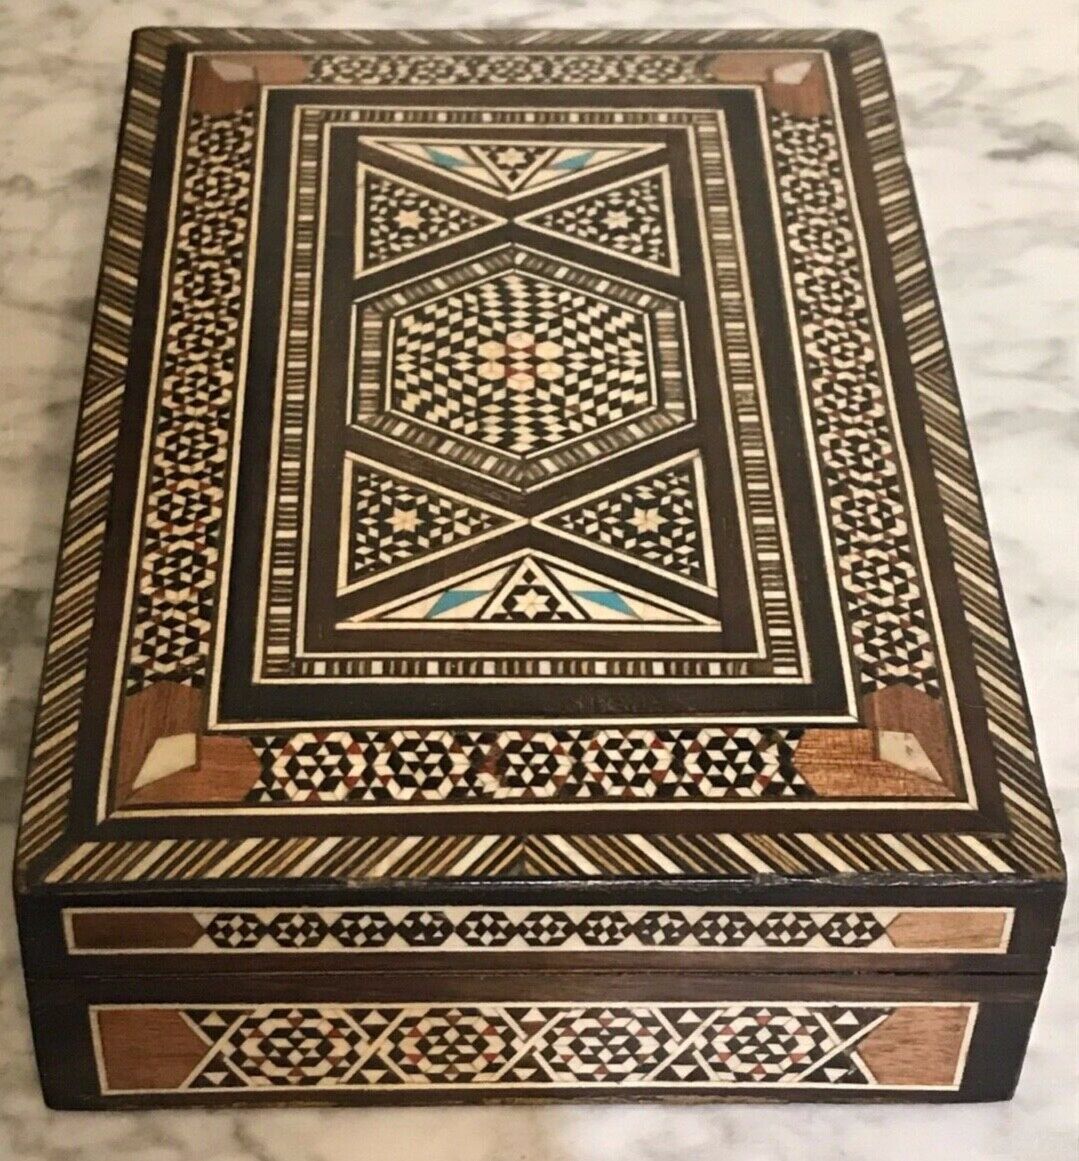 Retro Gorgeous Inlaid Mosaic Box, Geometric Design with Mother of Pearl Accents